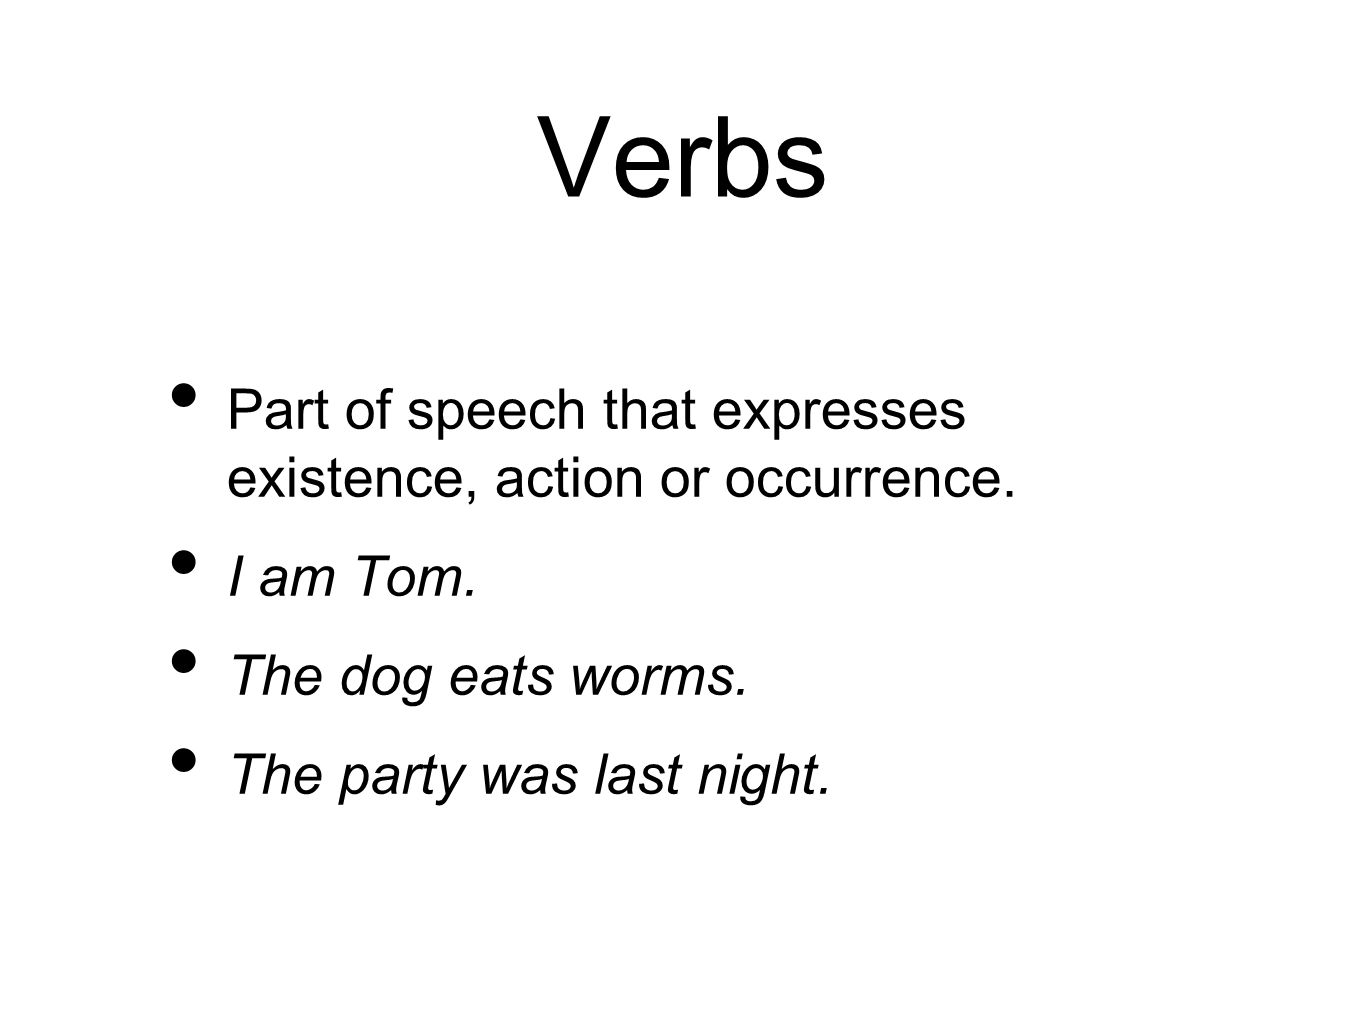 Verbs Part of speech that expresses existence, action or occurrence.